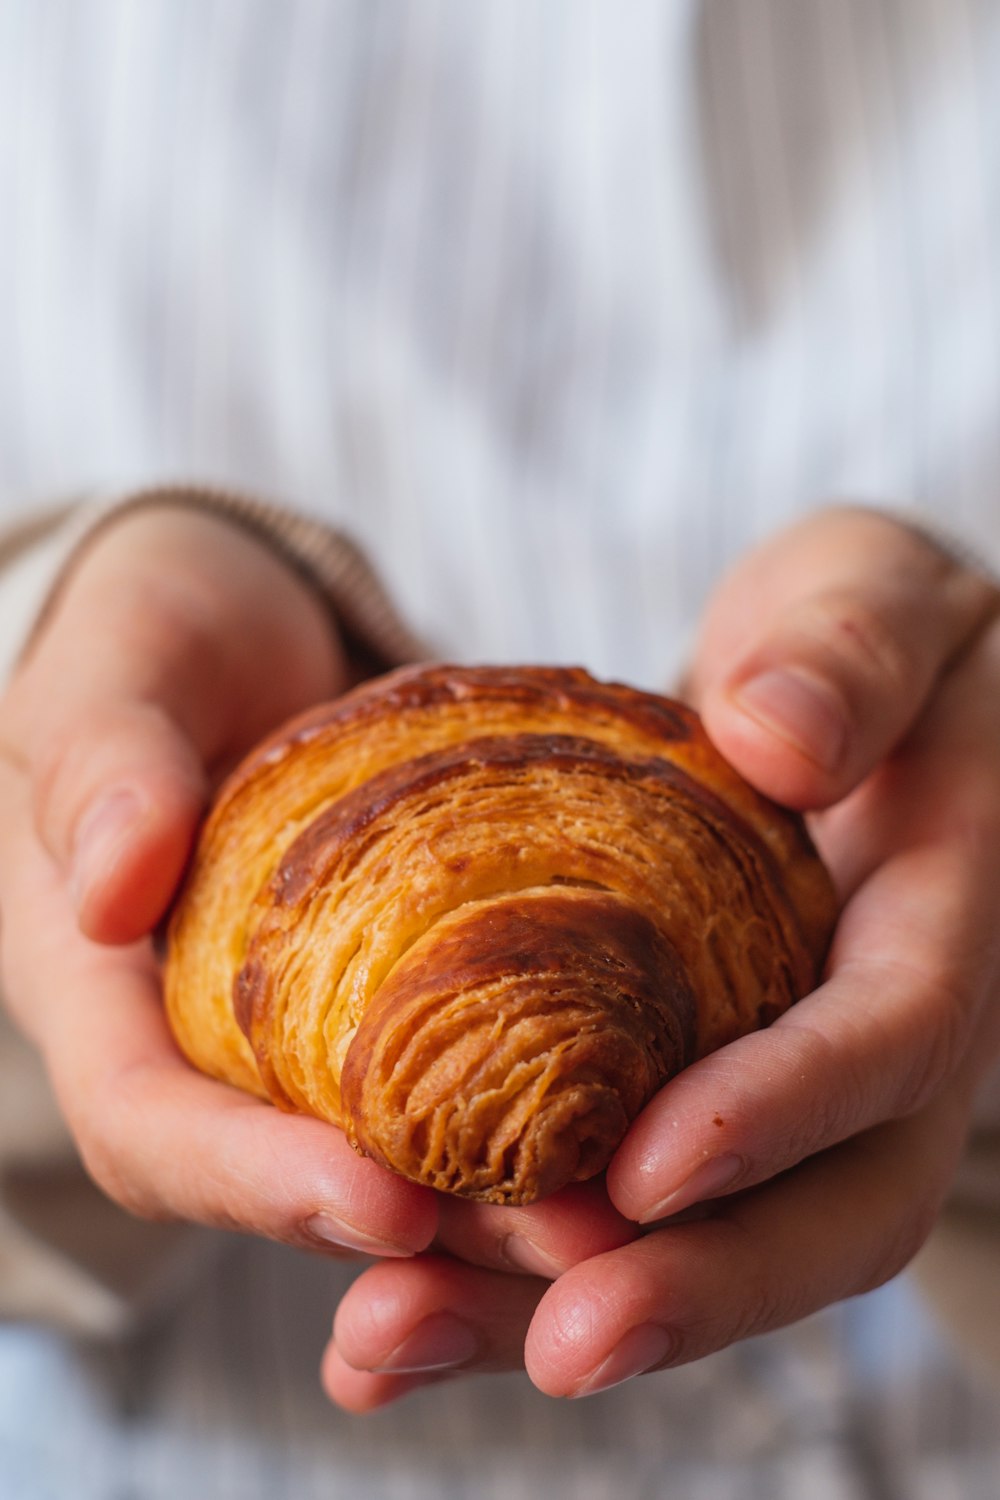 a person holding a pastry in their hands